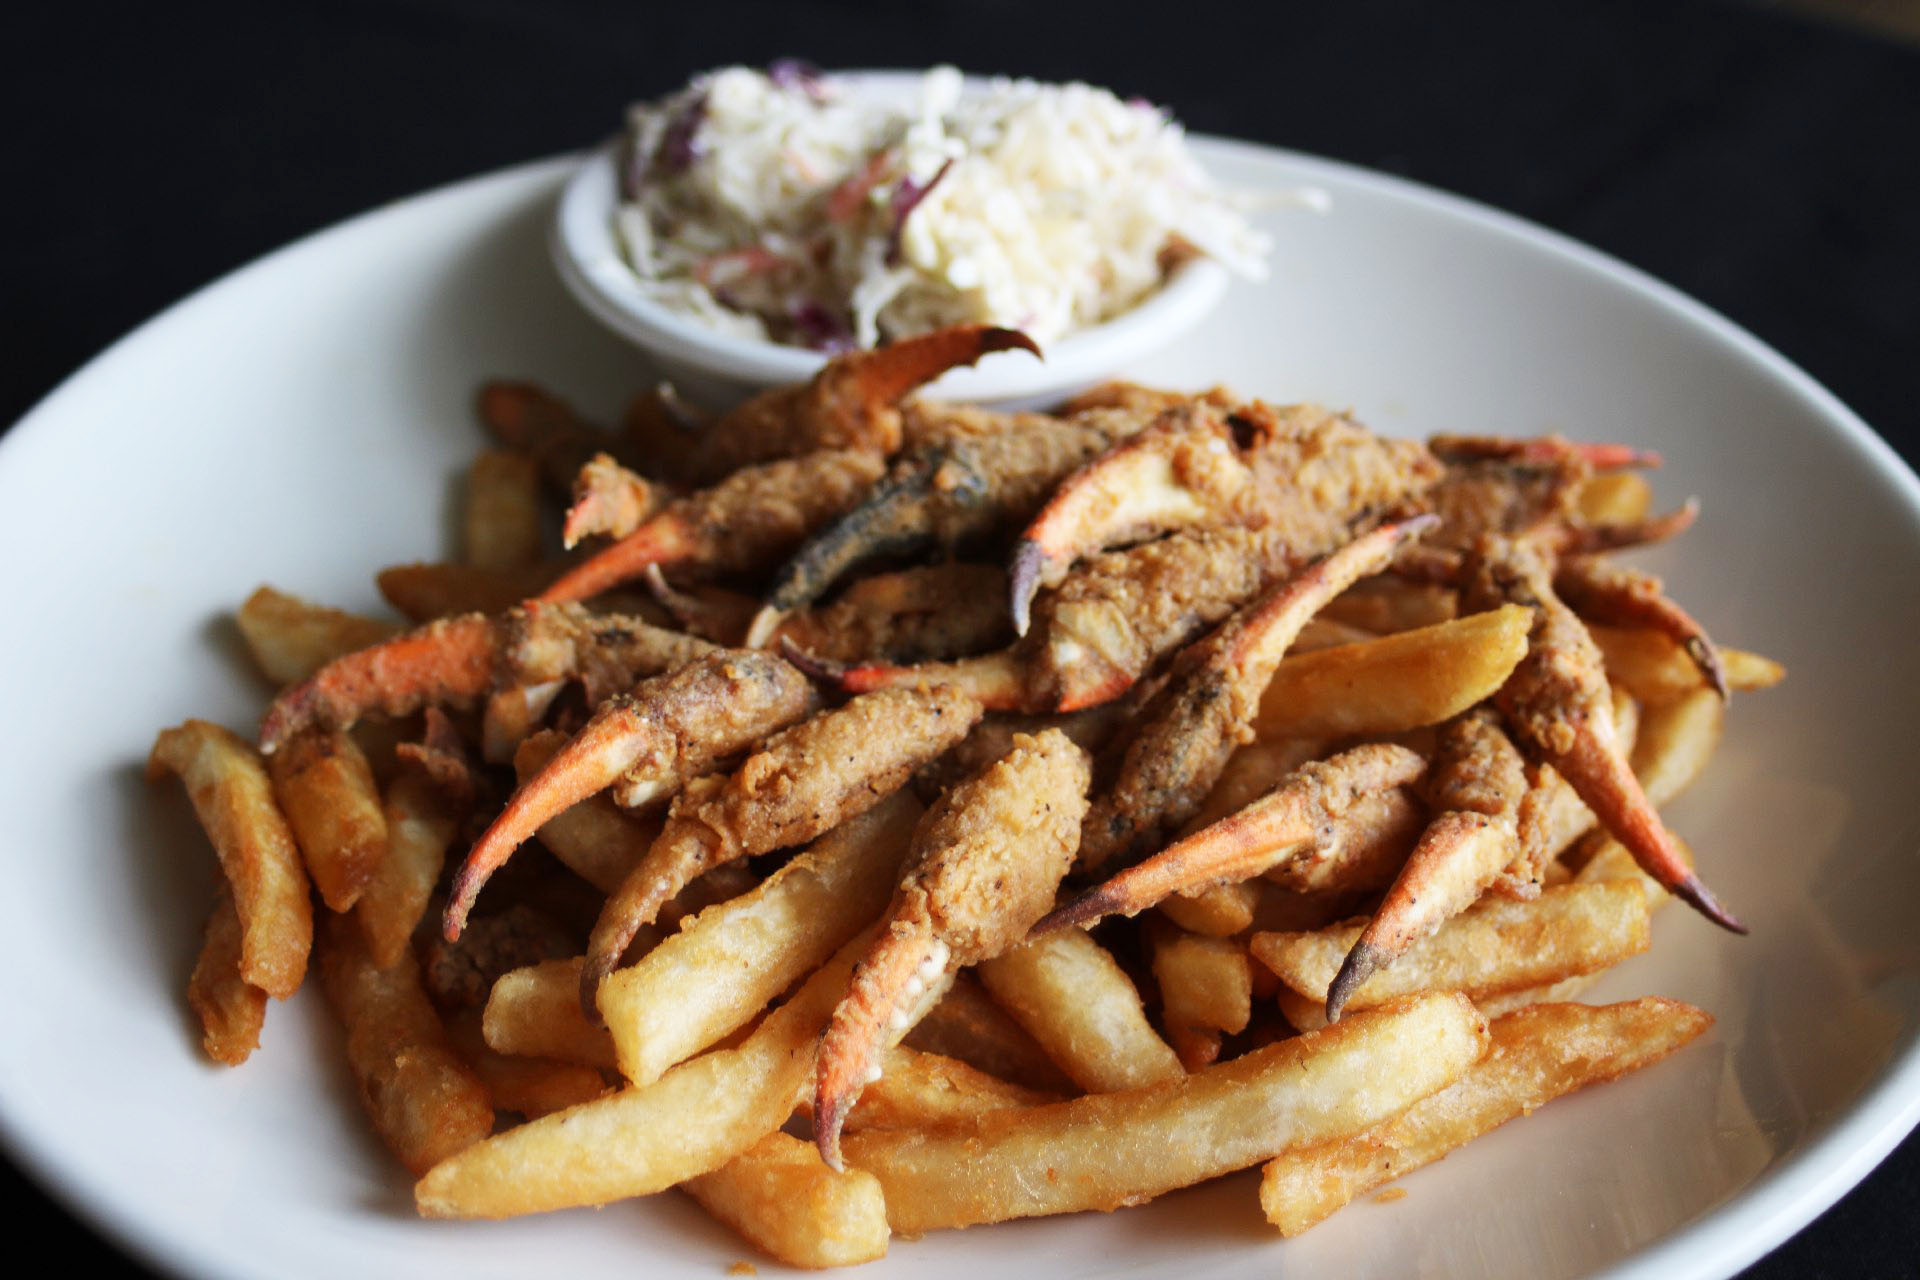 fried crab claws and fries